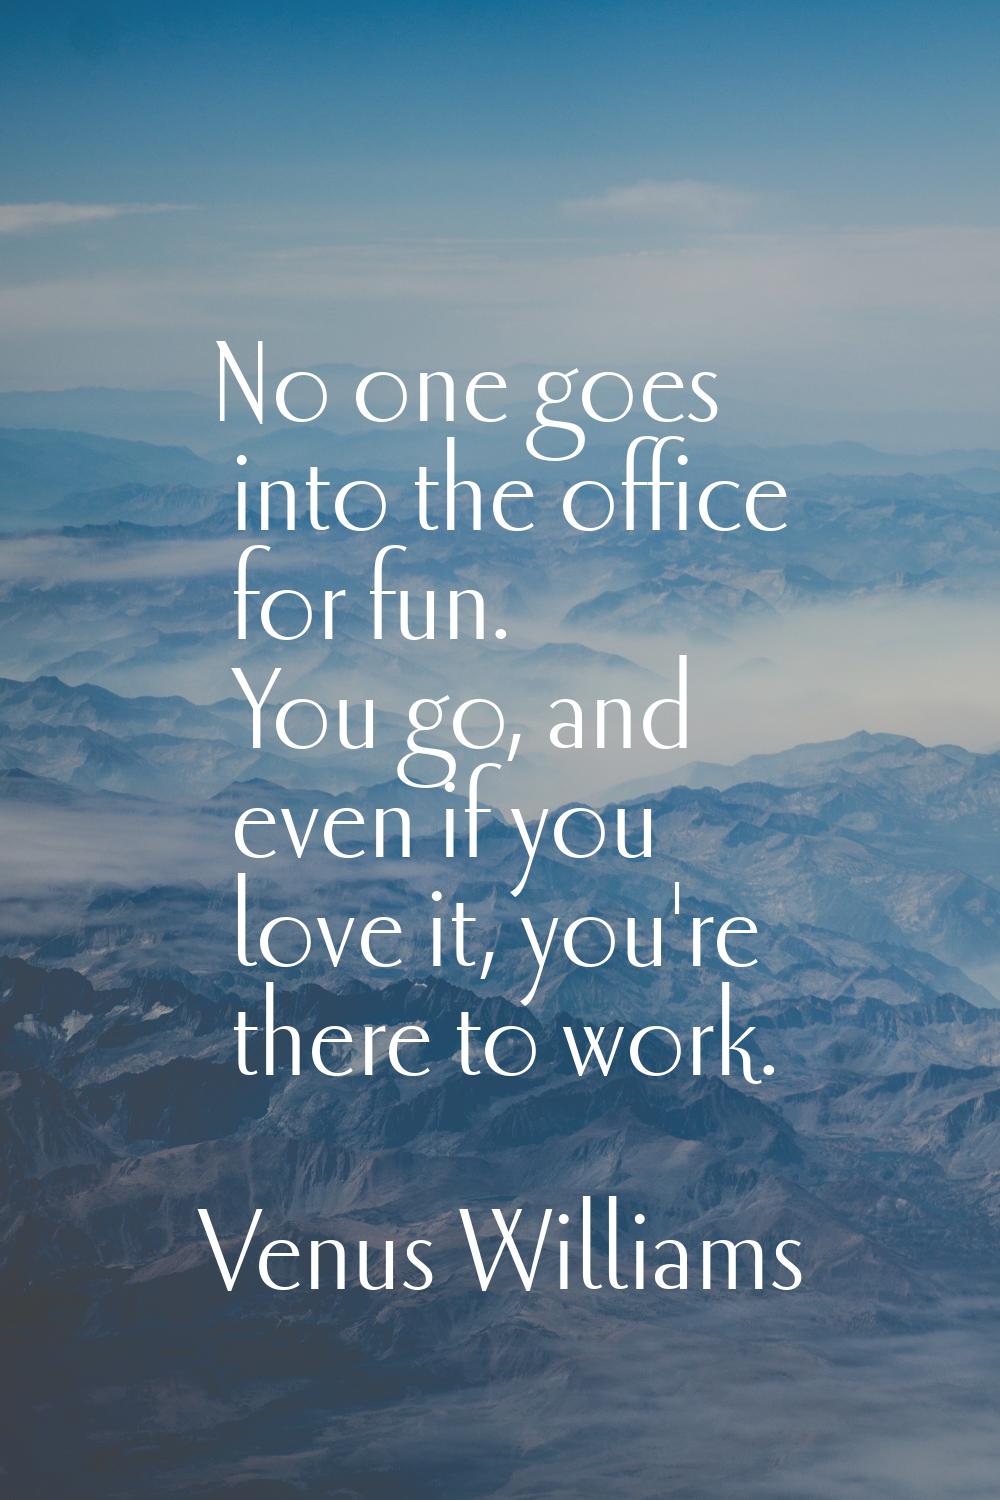 No one goes into the office for fun. You go, and even if you love it, you're there to work.